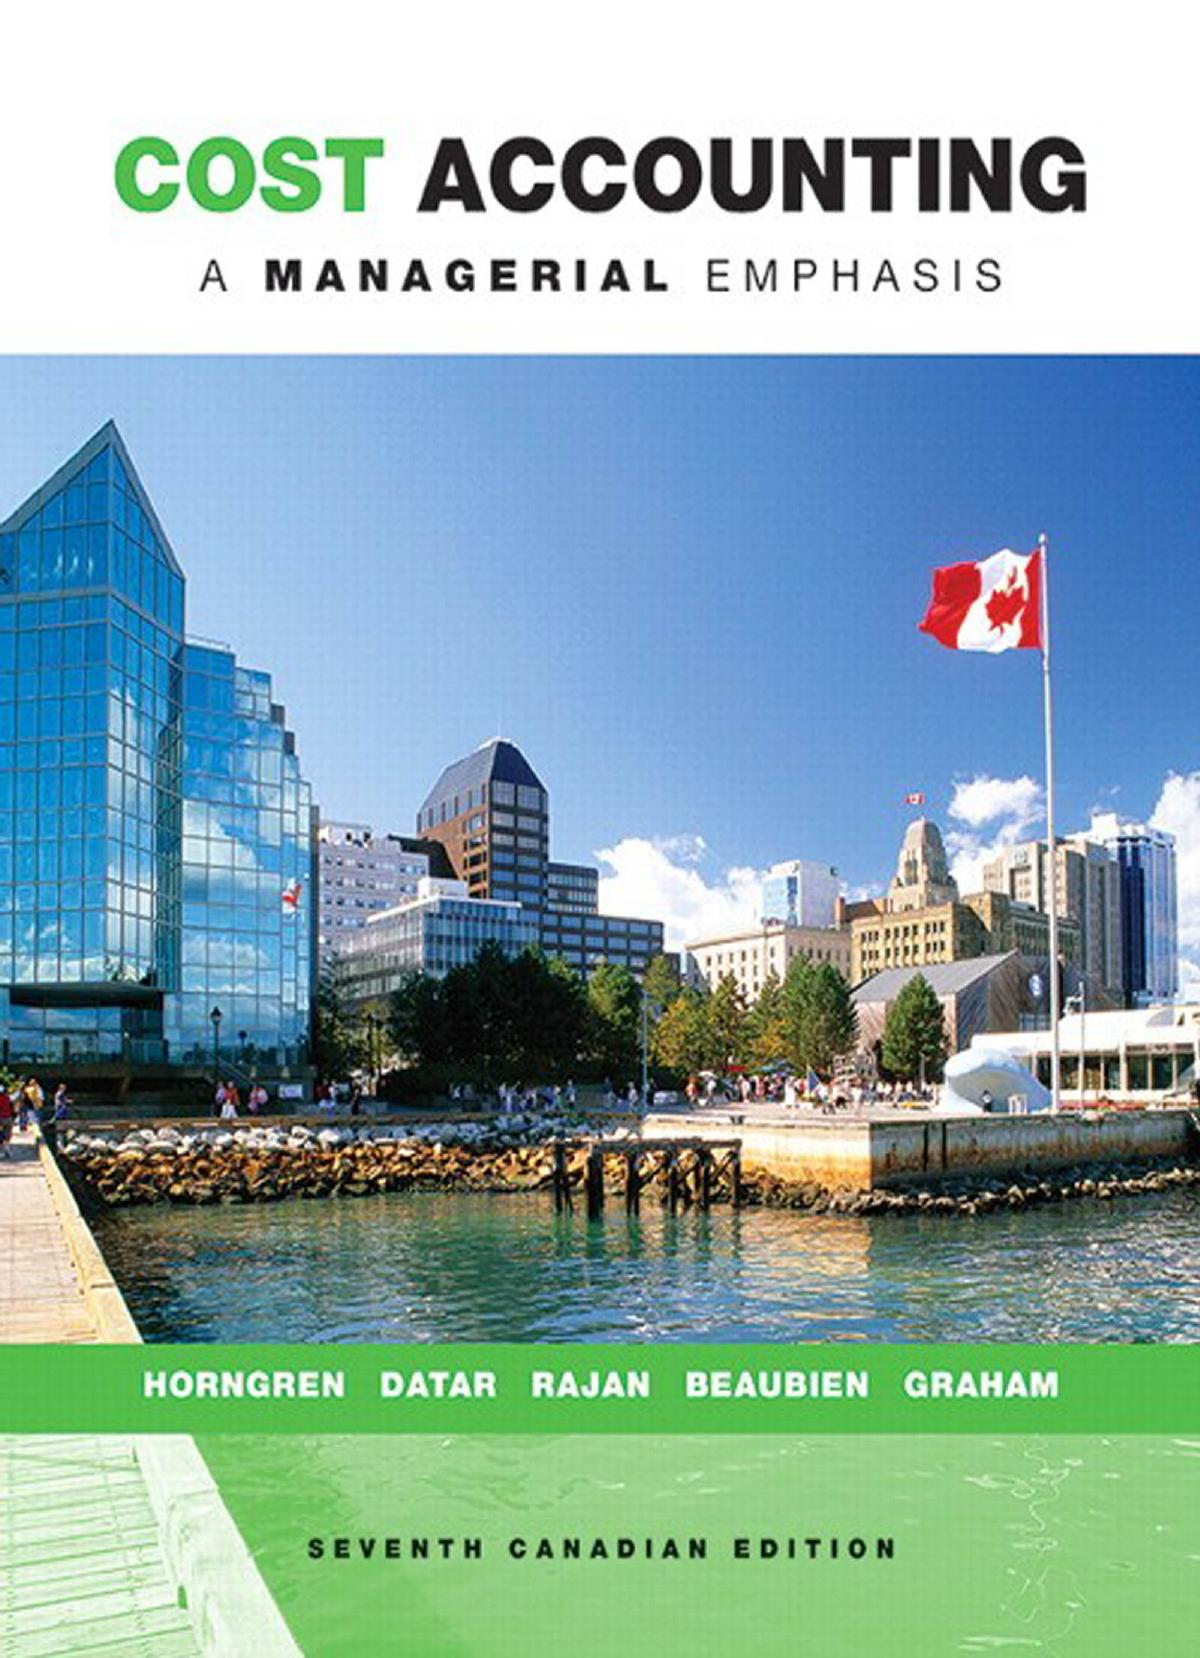 Cost Accounting A Managerial Emphasis, Seventh 7th Canadian Edition.jpg